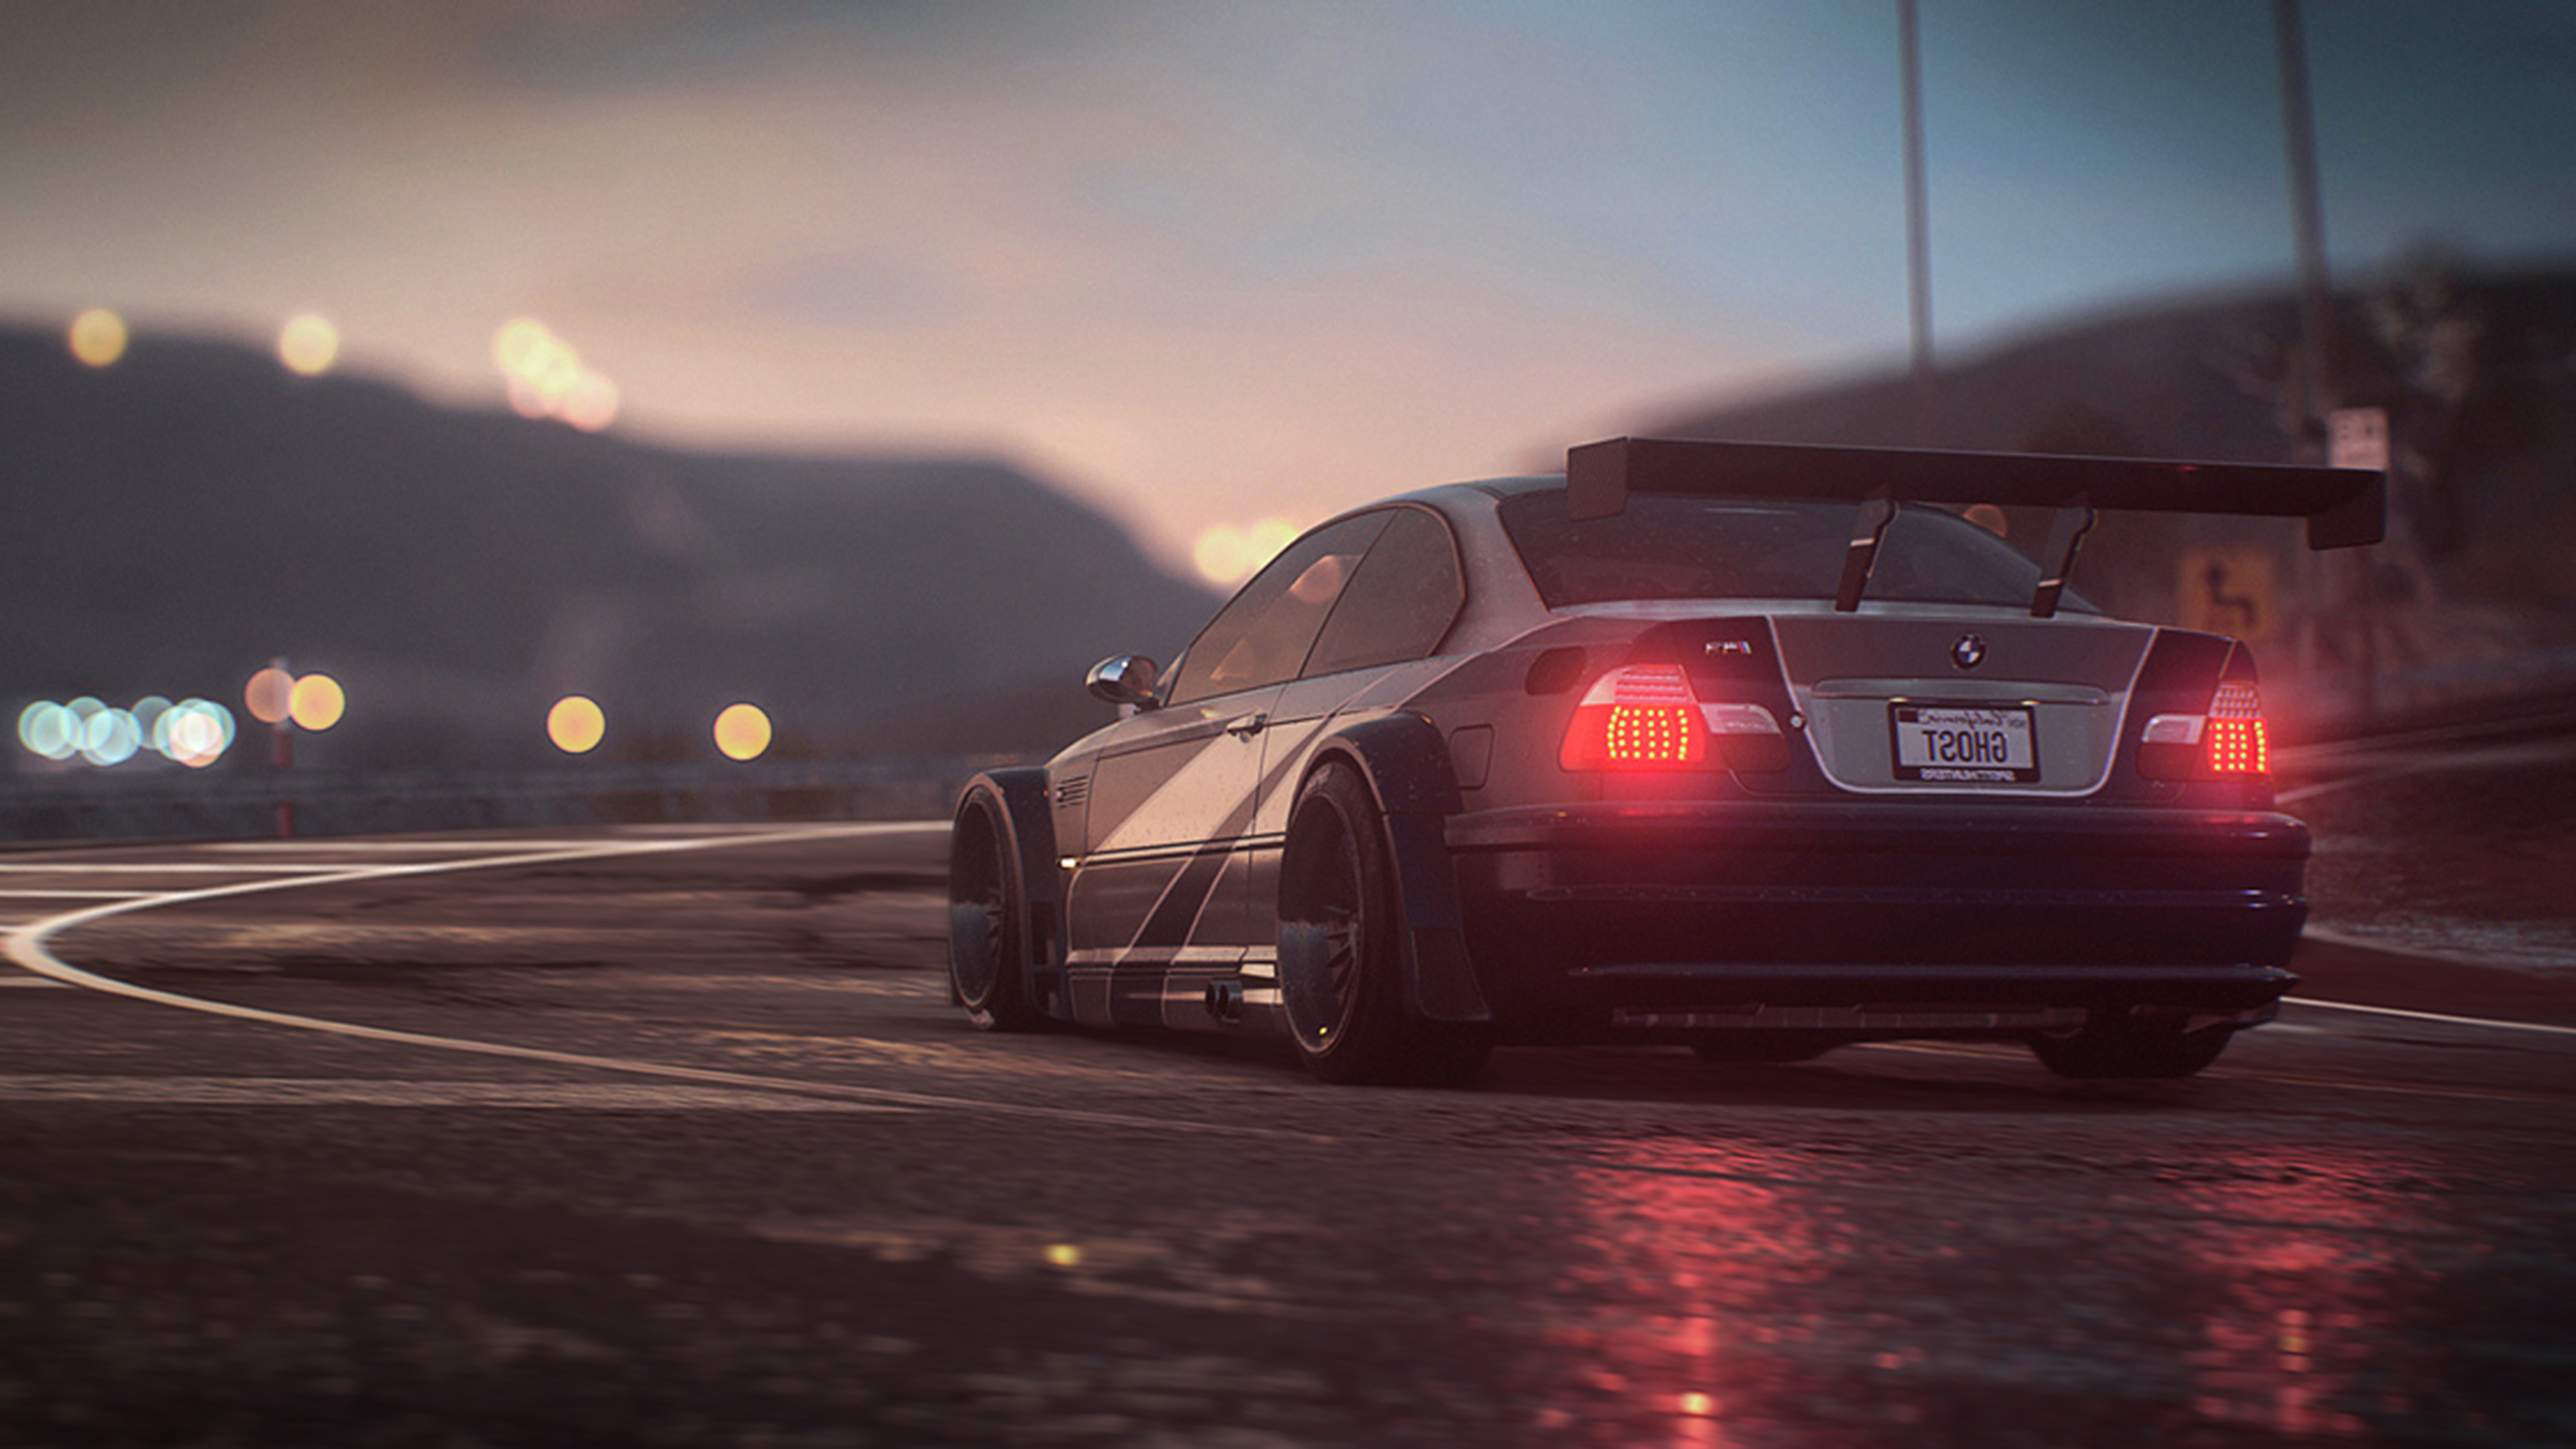 Need for Speed Wallpapers - Amazing wallpapers and